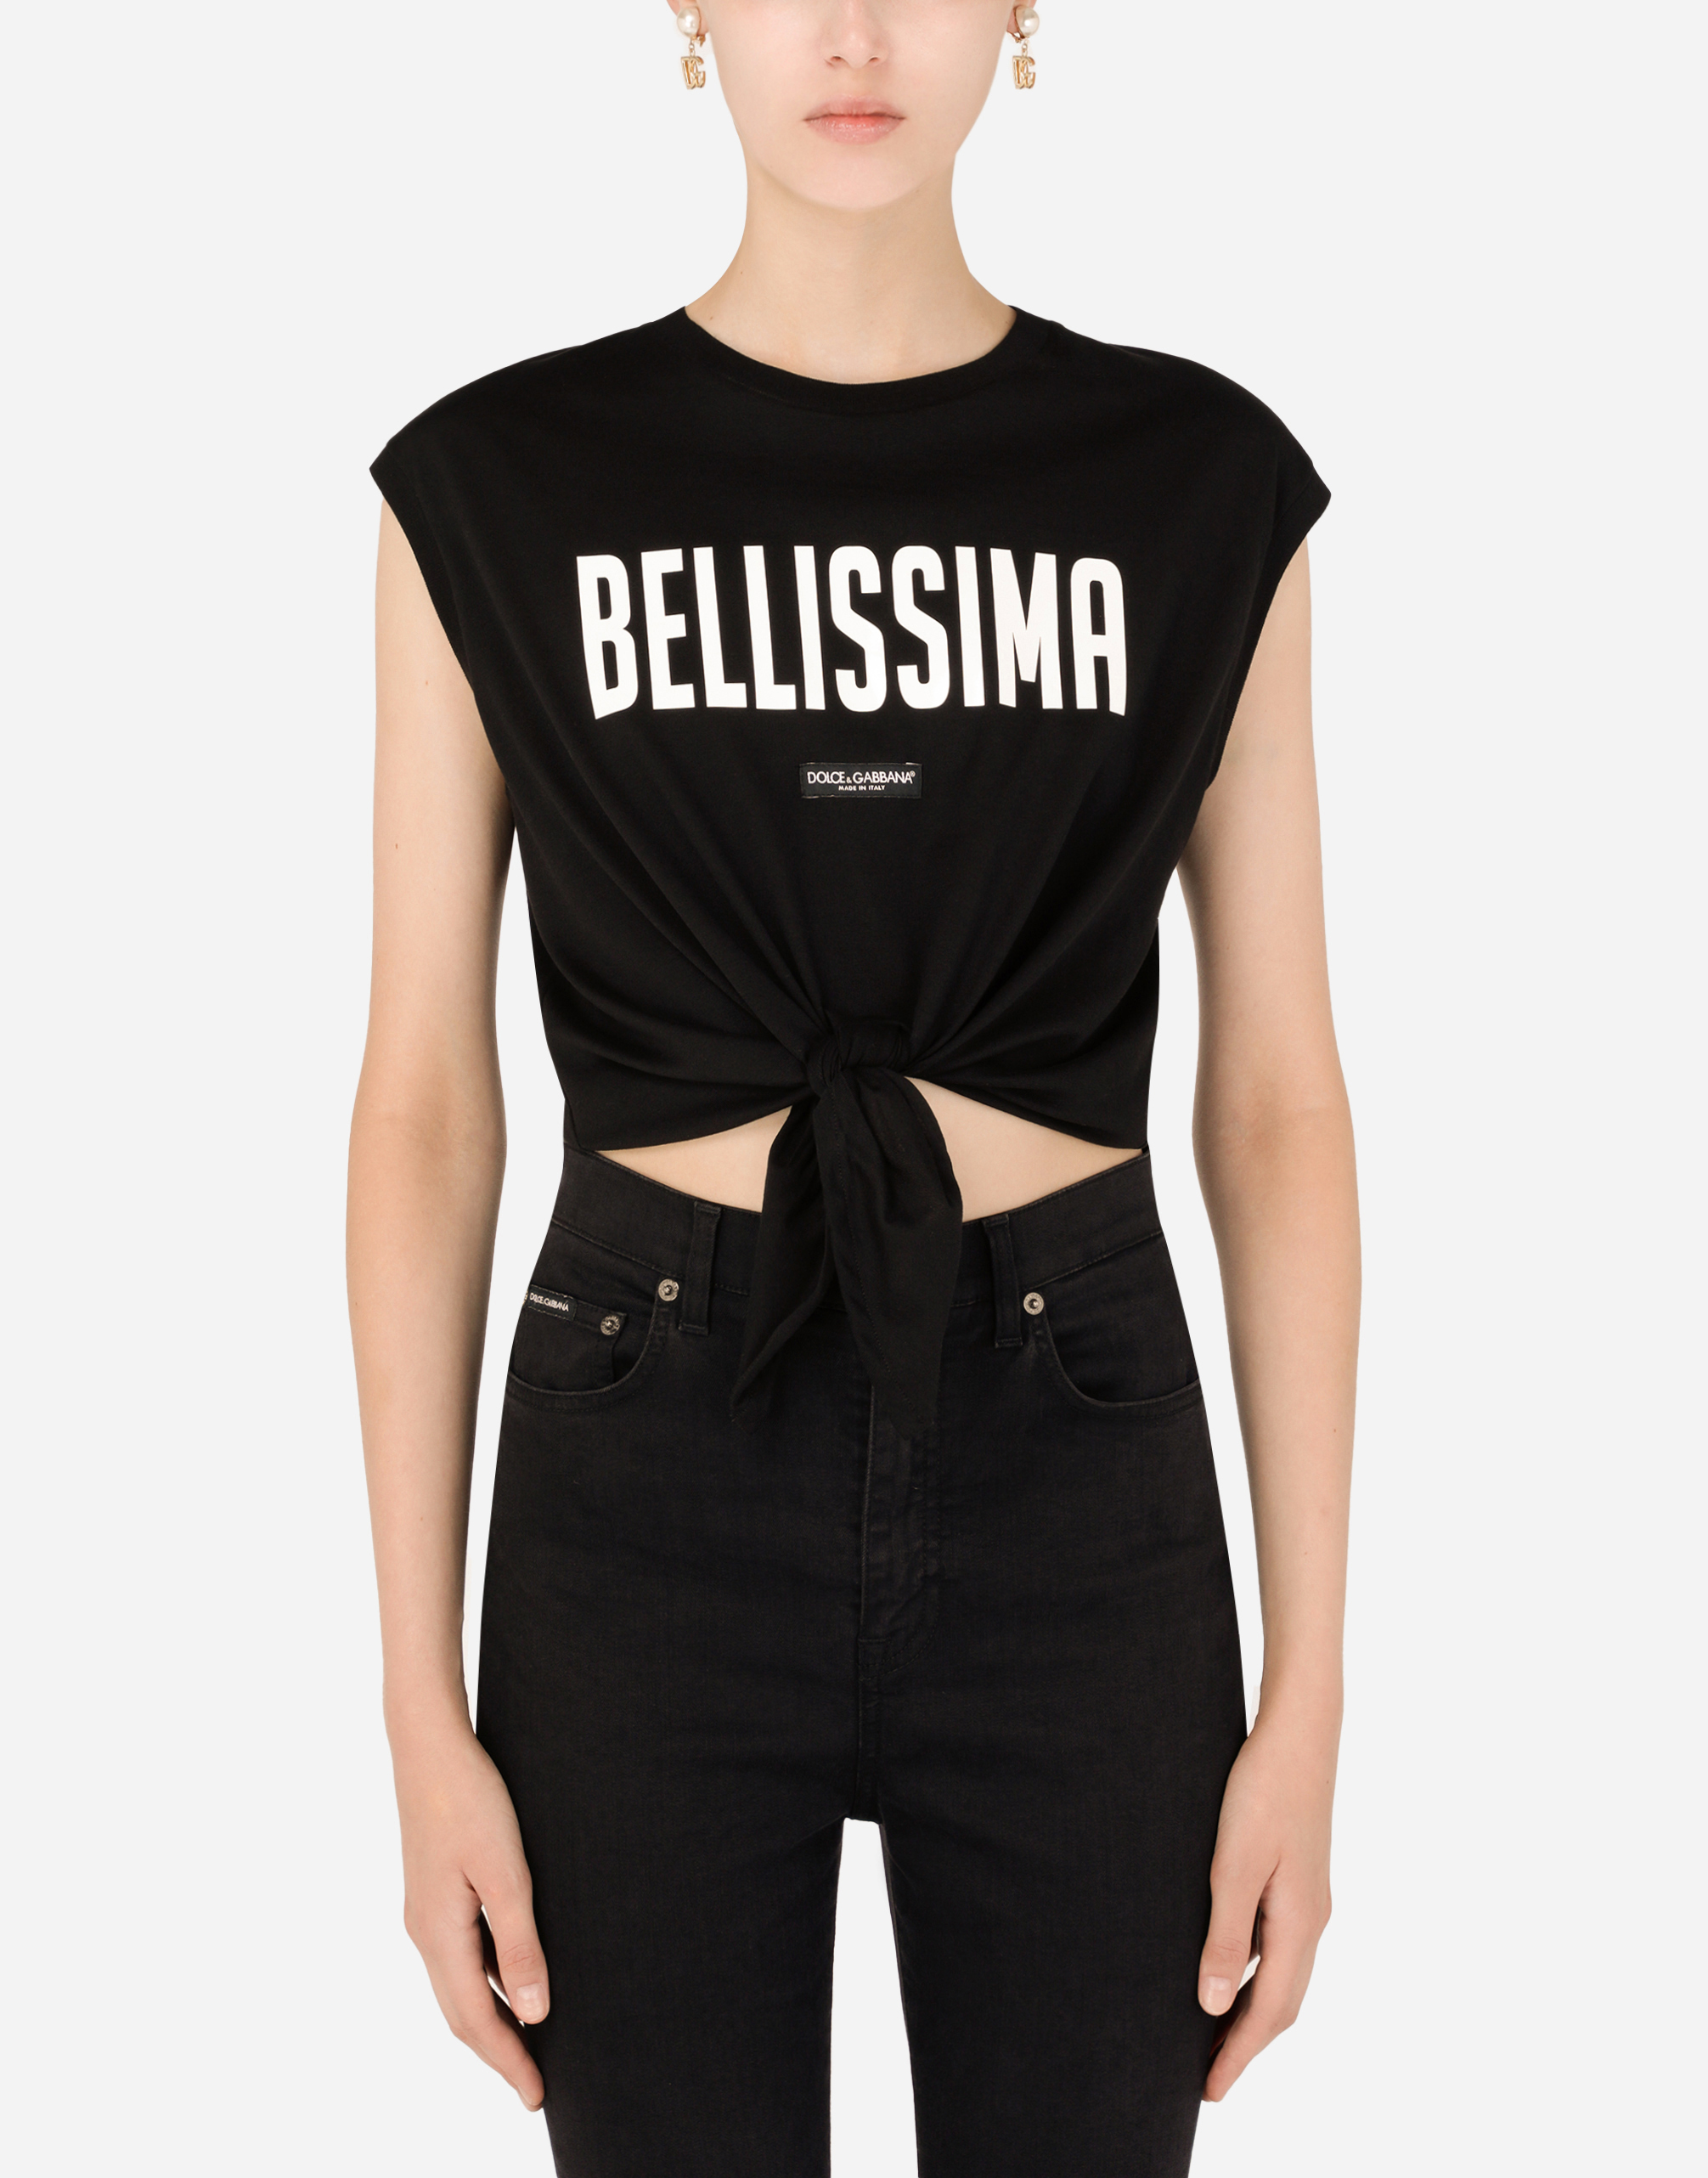 Jersey tank top with “Bellissima” print and knot detail in Black